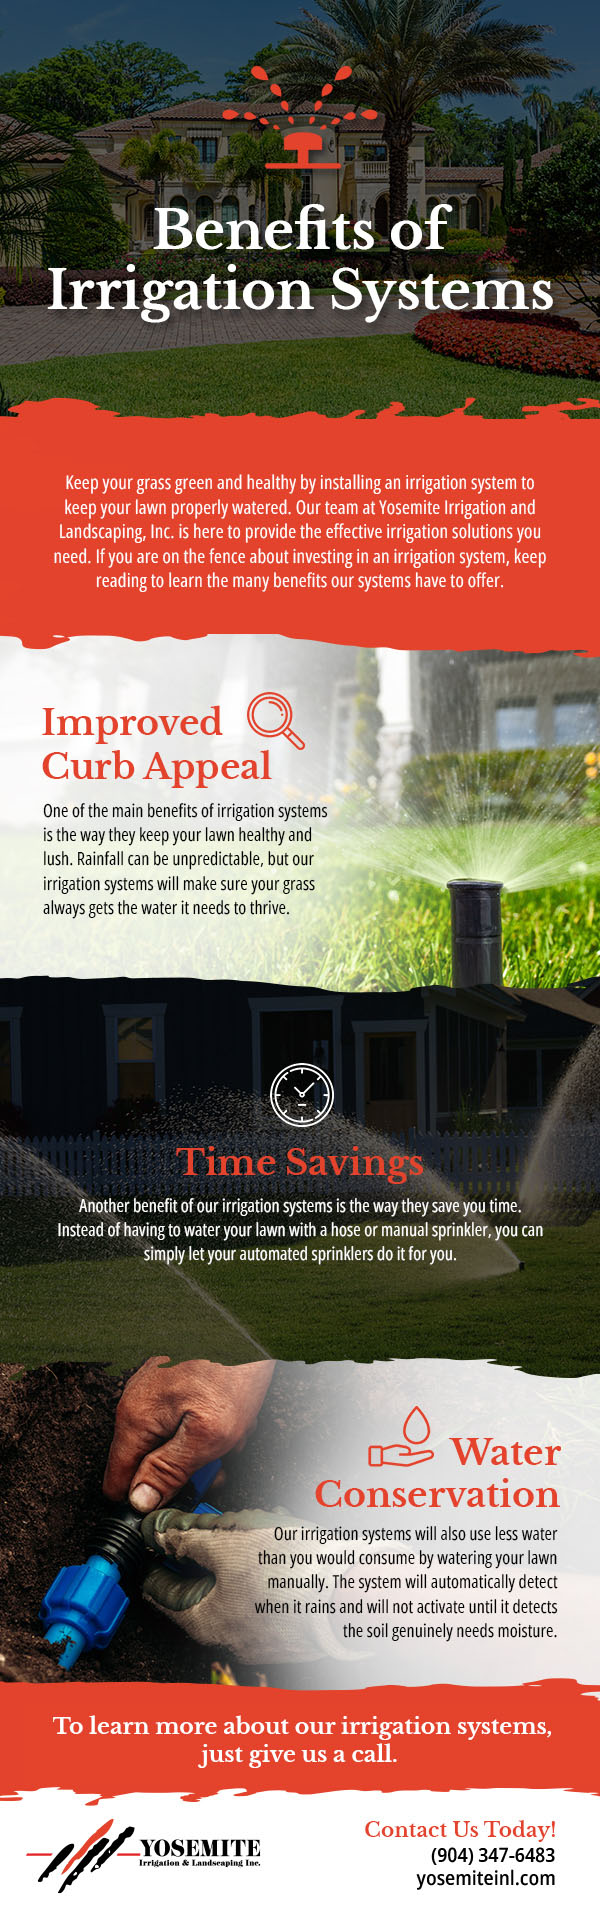 Benefits of Irrigation Systems